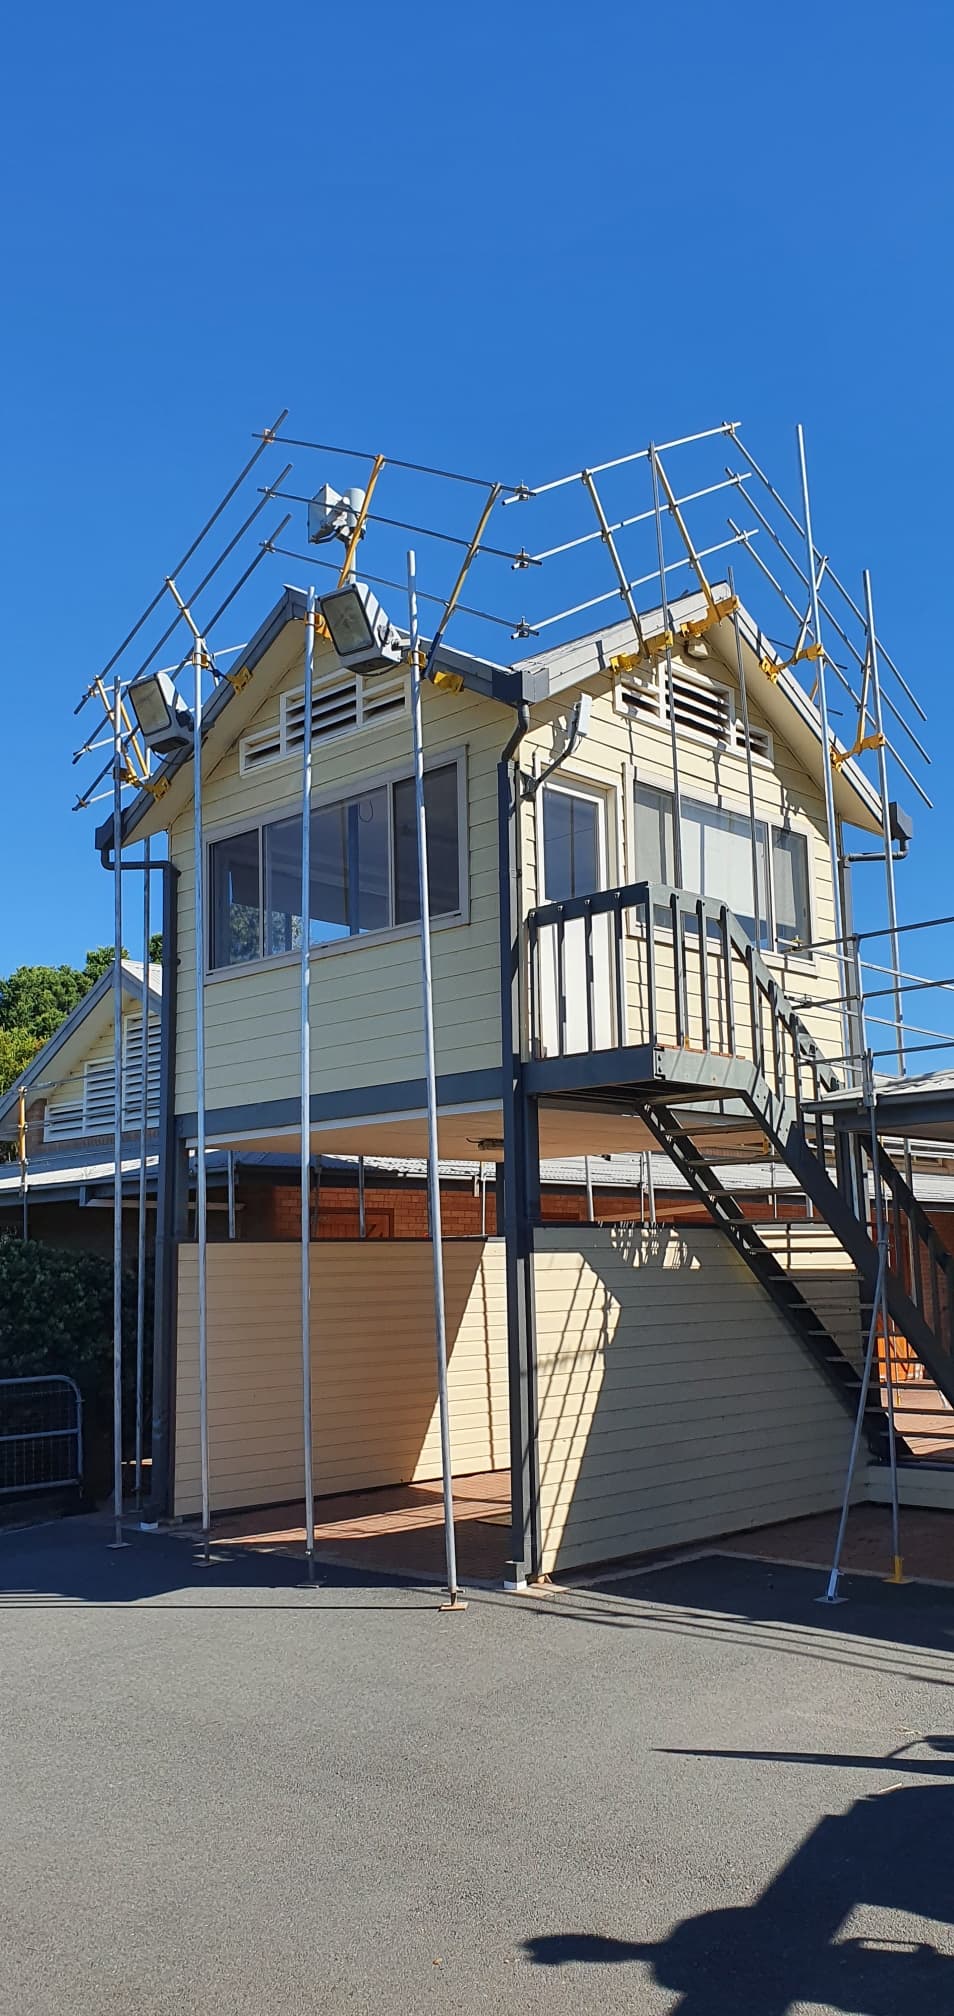 House With Roof Guard — Roof Safety Systems in Sandgate, NSW